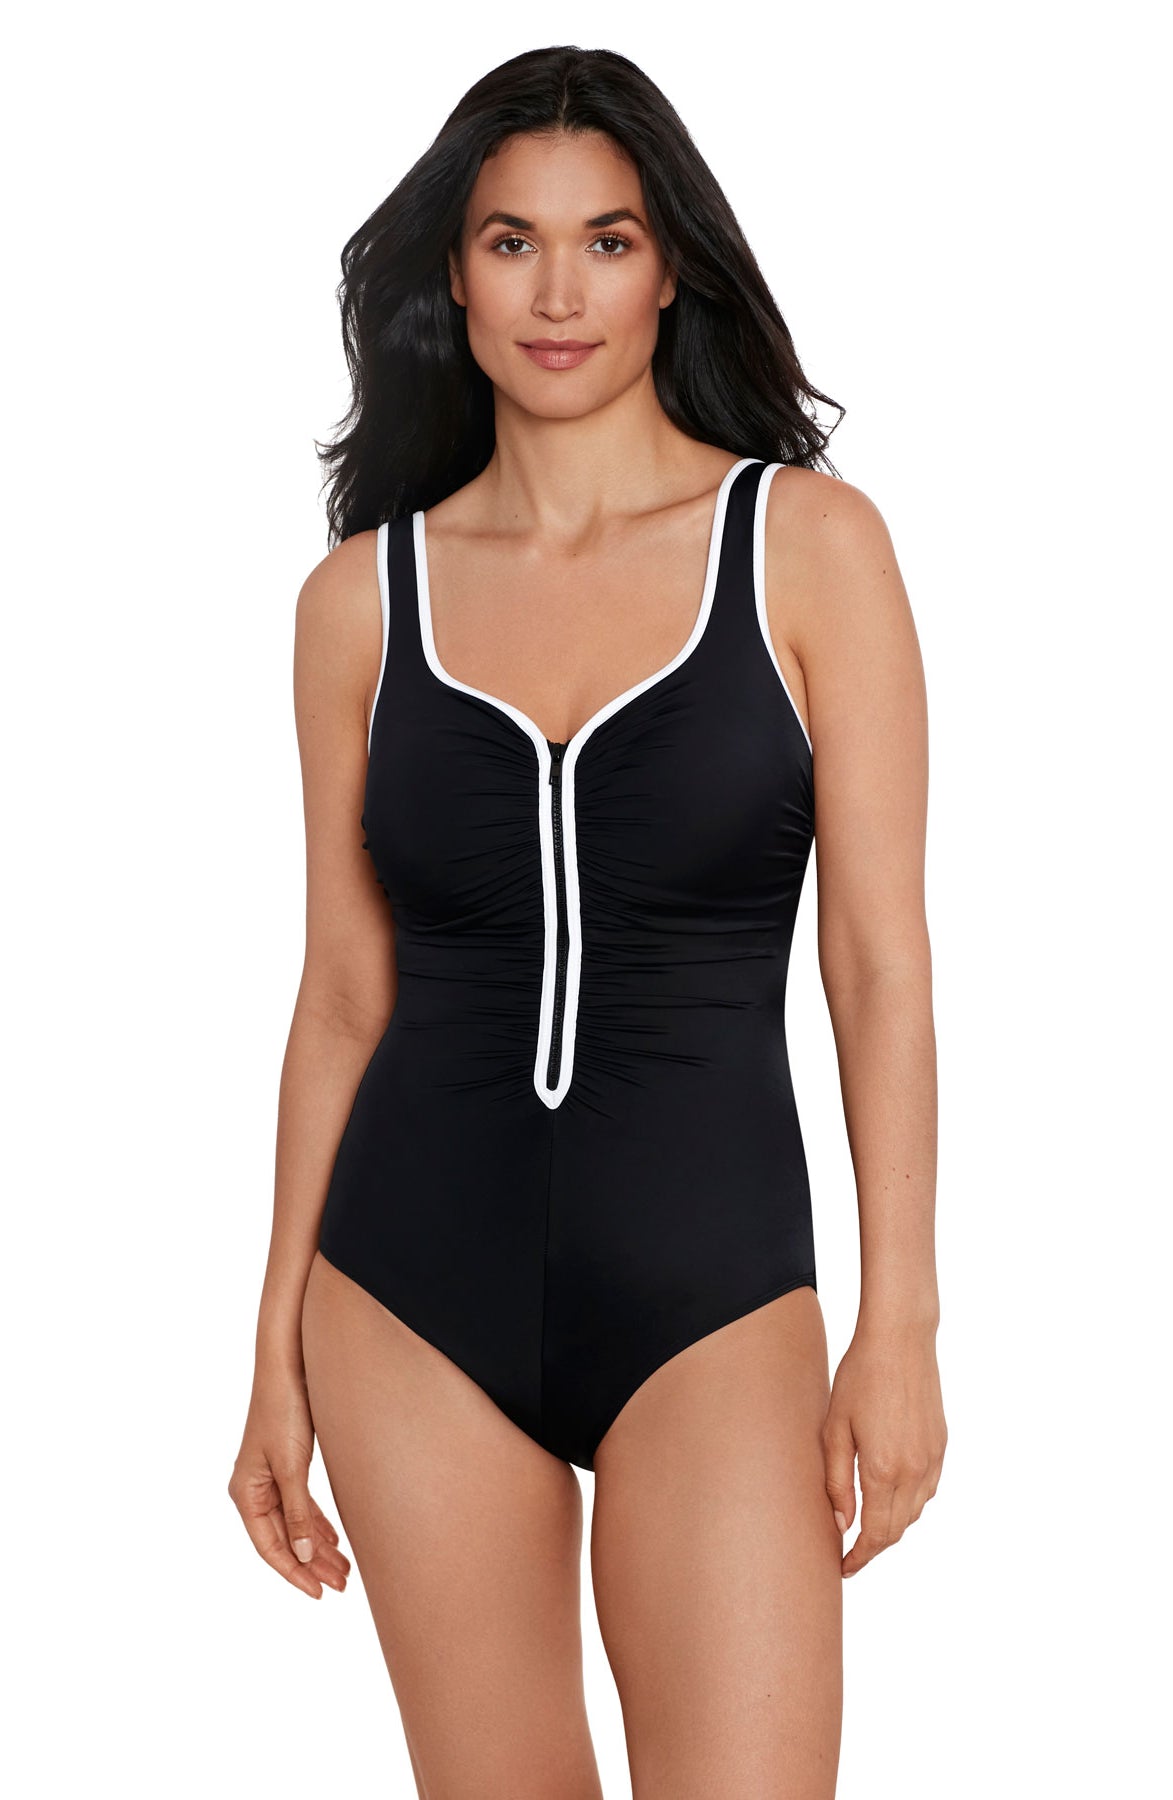 Shapesolver Sport: One Piece Color Coated Zipper Tank Swimsuit